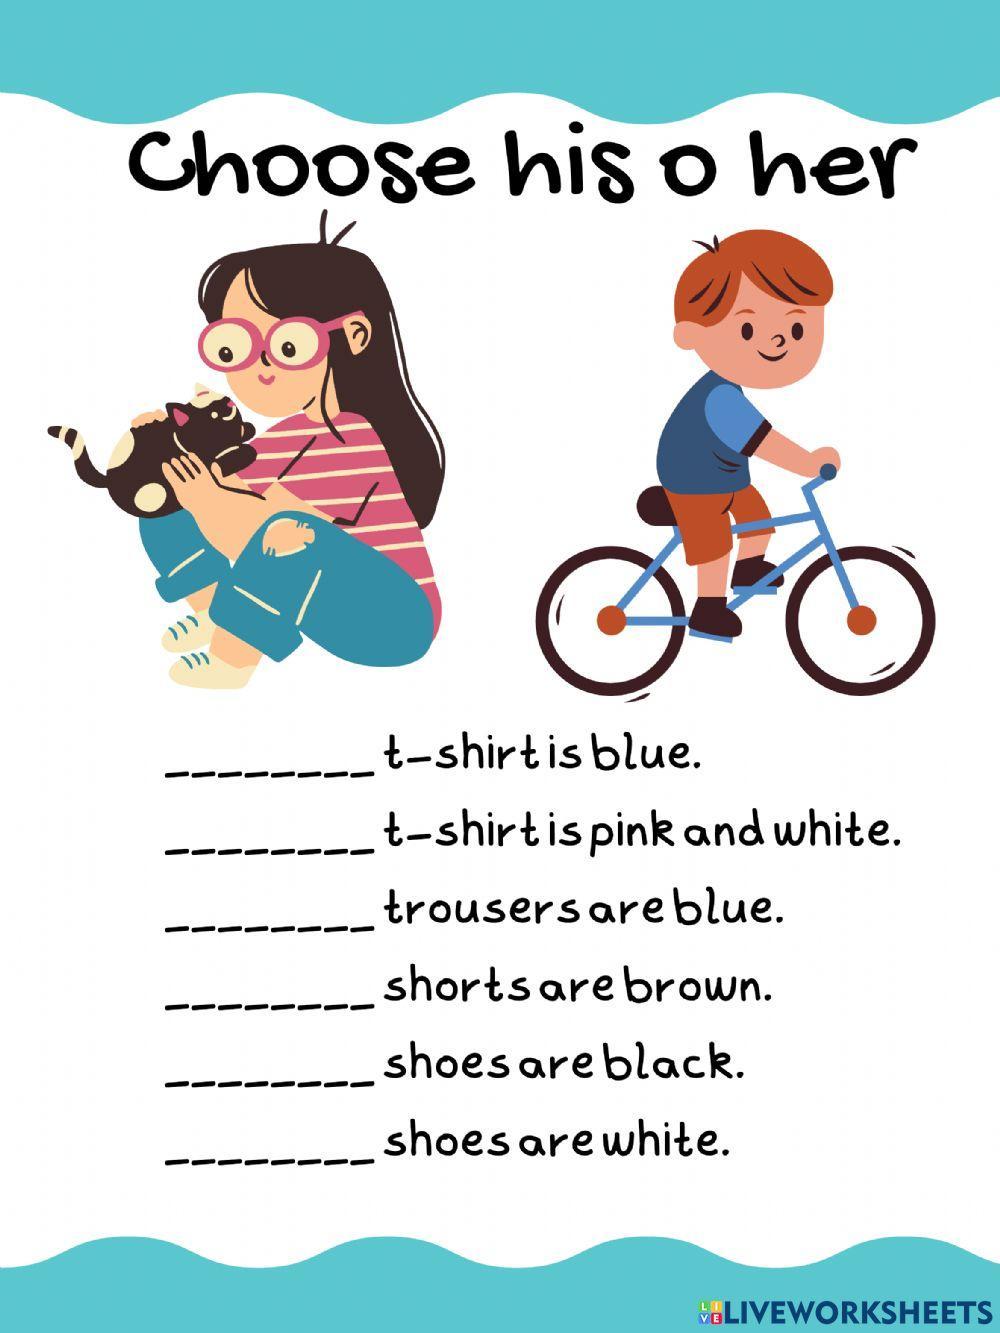 Choose his her